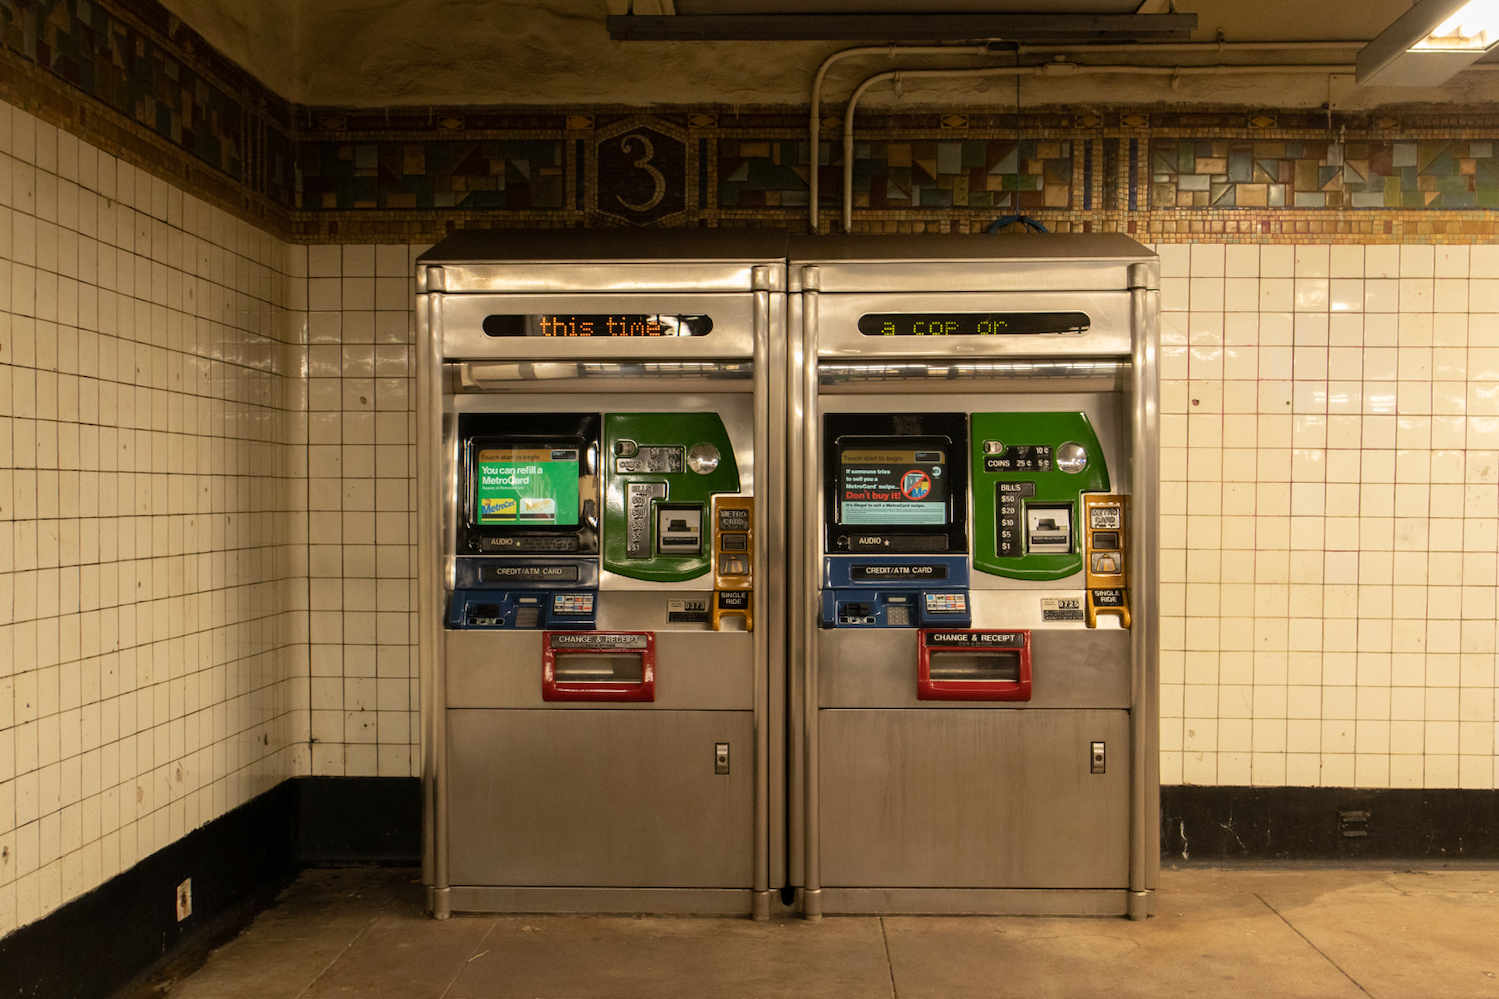 Opinion: New York, don't get rid of the MetroCard - Washington Square News